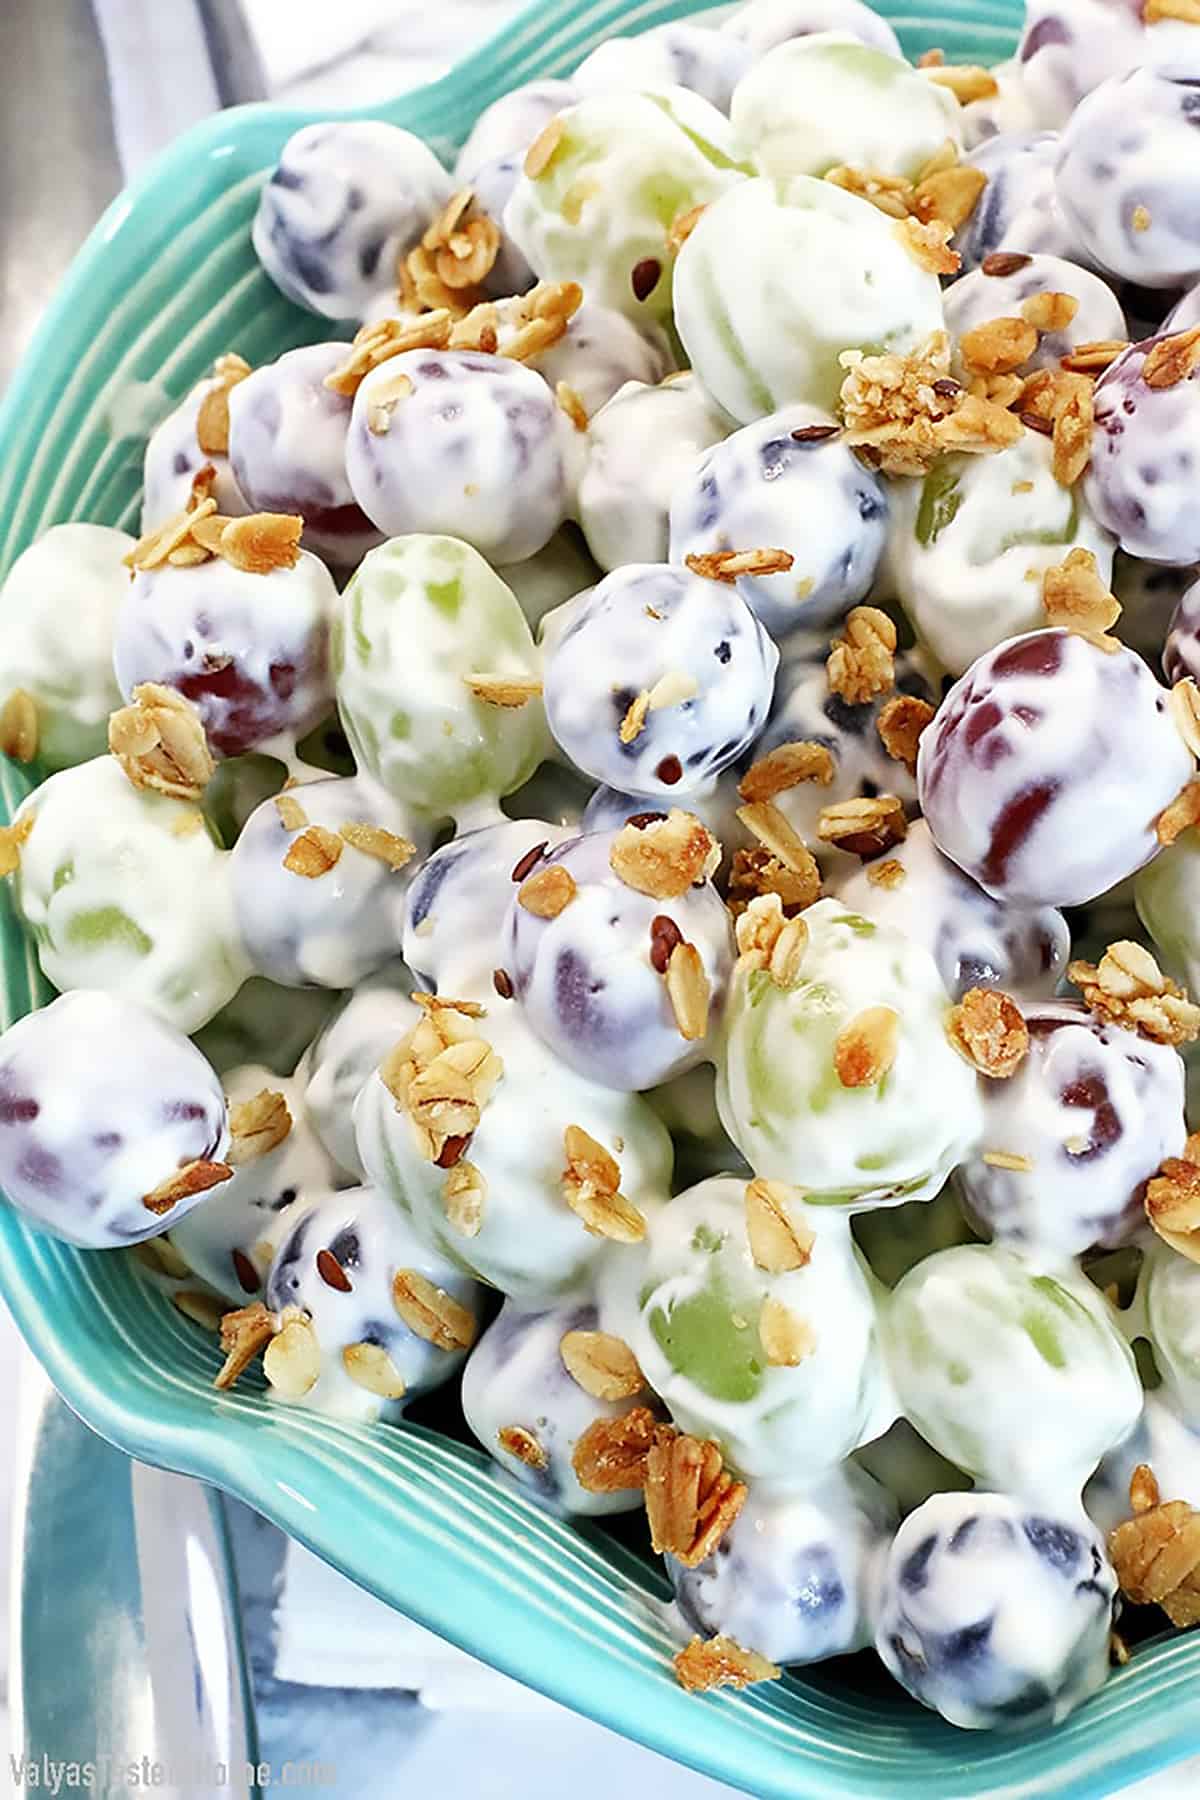 Best Creamy Grape Salad 2 This Best Creamy Grape Salad is a delicious blend of fresh juicy grapes in a creamy vanilla yogurt dressing, and a touch of sweet and sour is a perfect way to sweeten up a picnic, backyard family gathering, or any summer occasion.